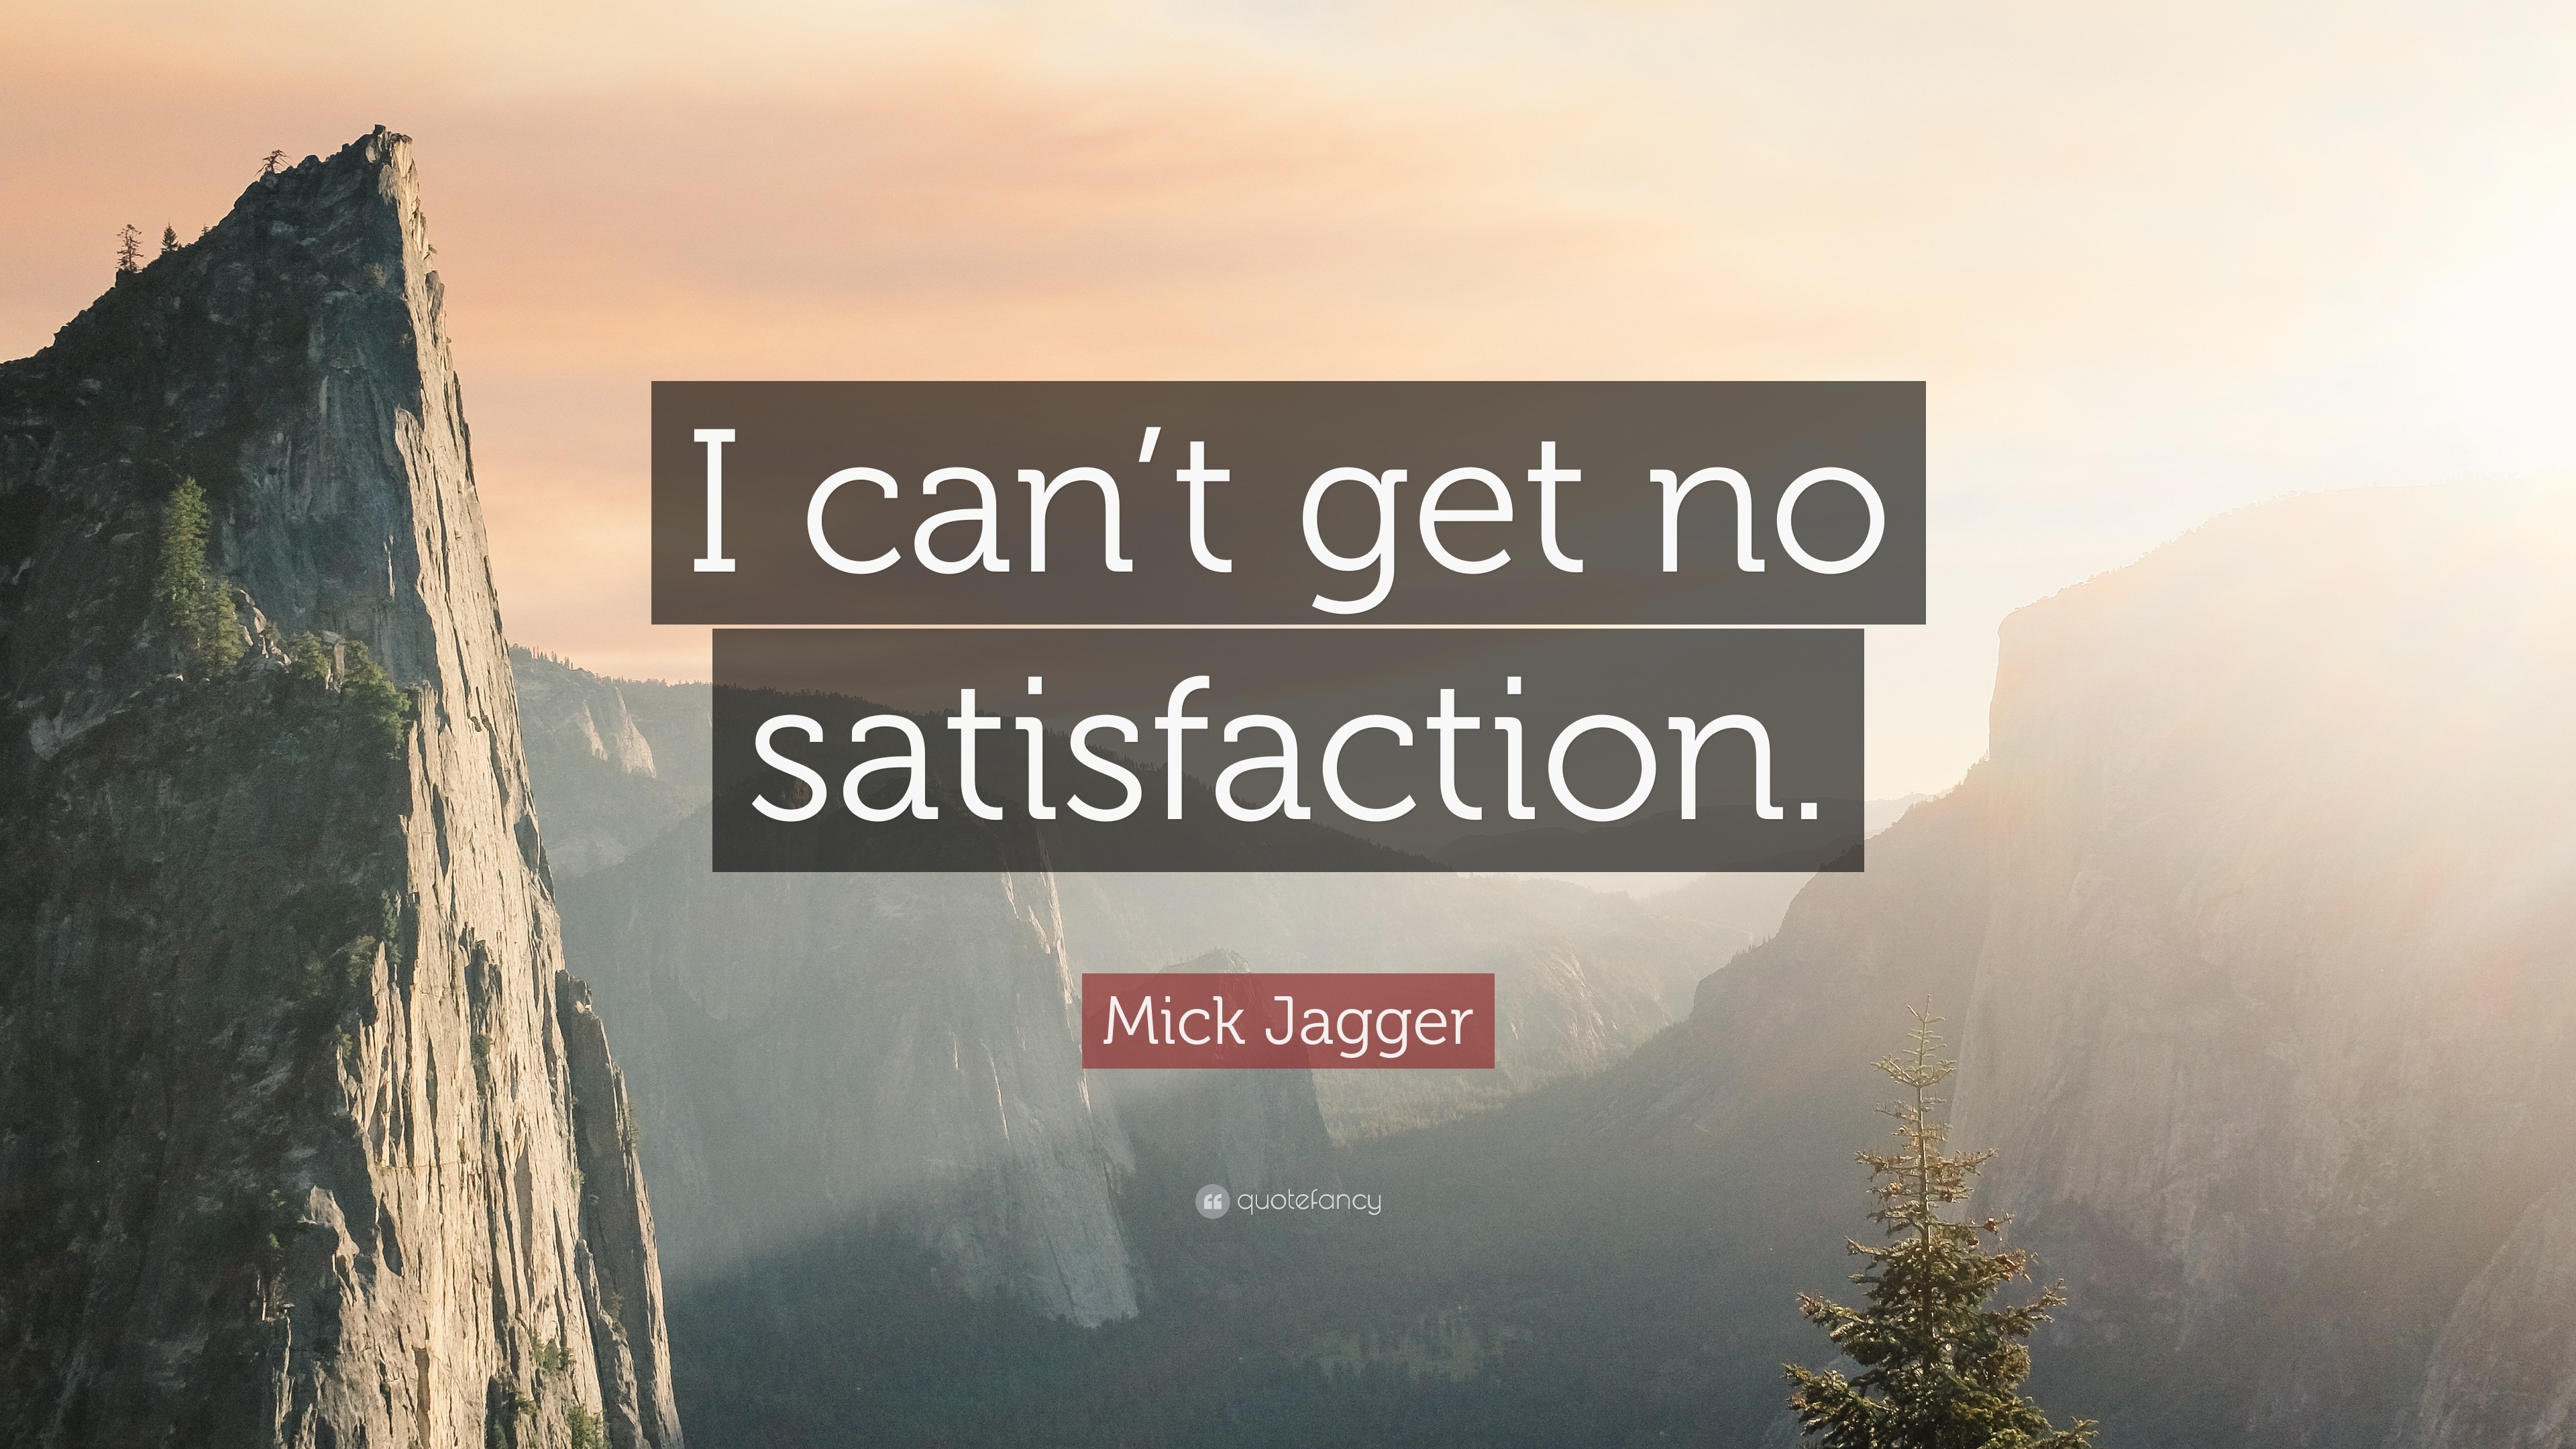 662497-Mick-Jagger-Quote-I-can-t-get-no-satisfaction.jpg